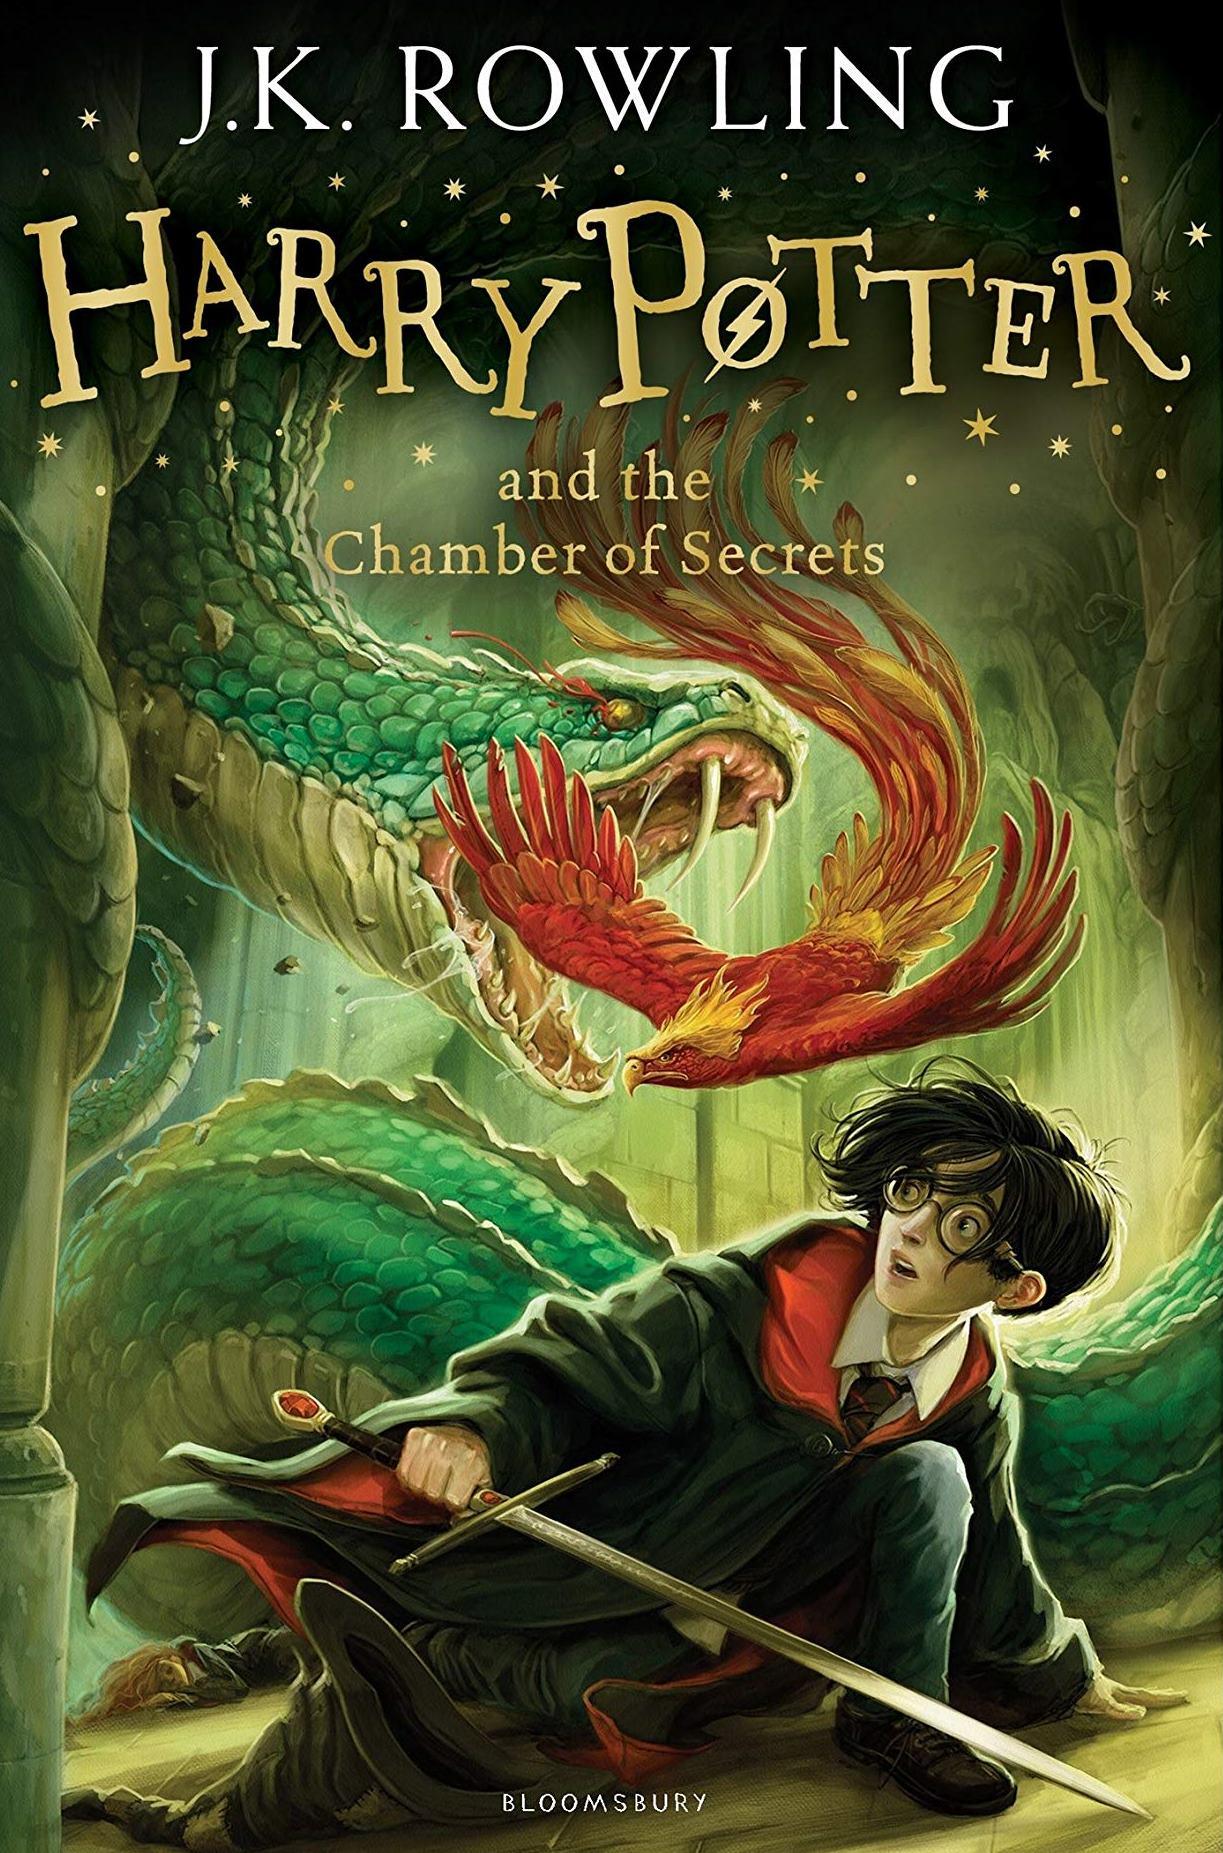 book summary harry potter and the chamber of secrets